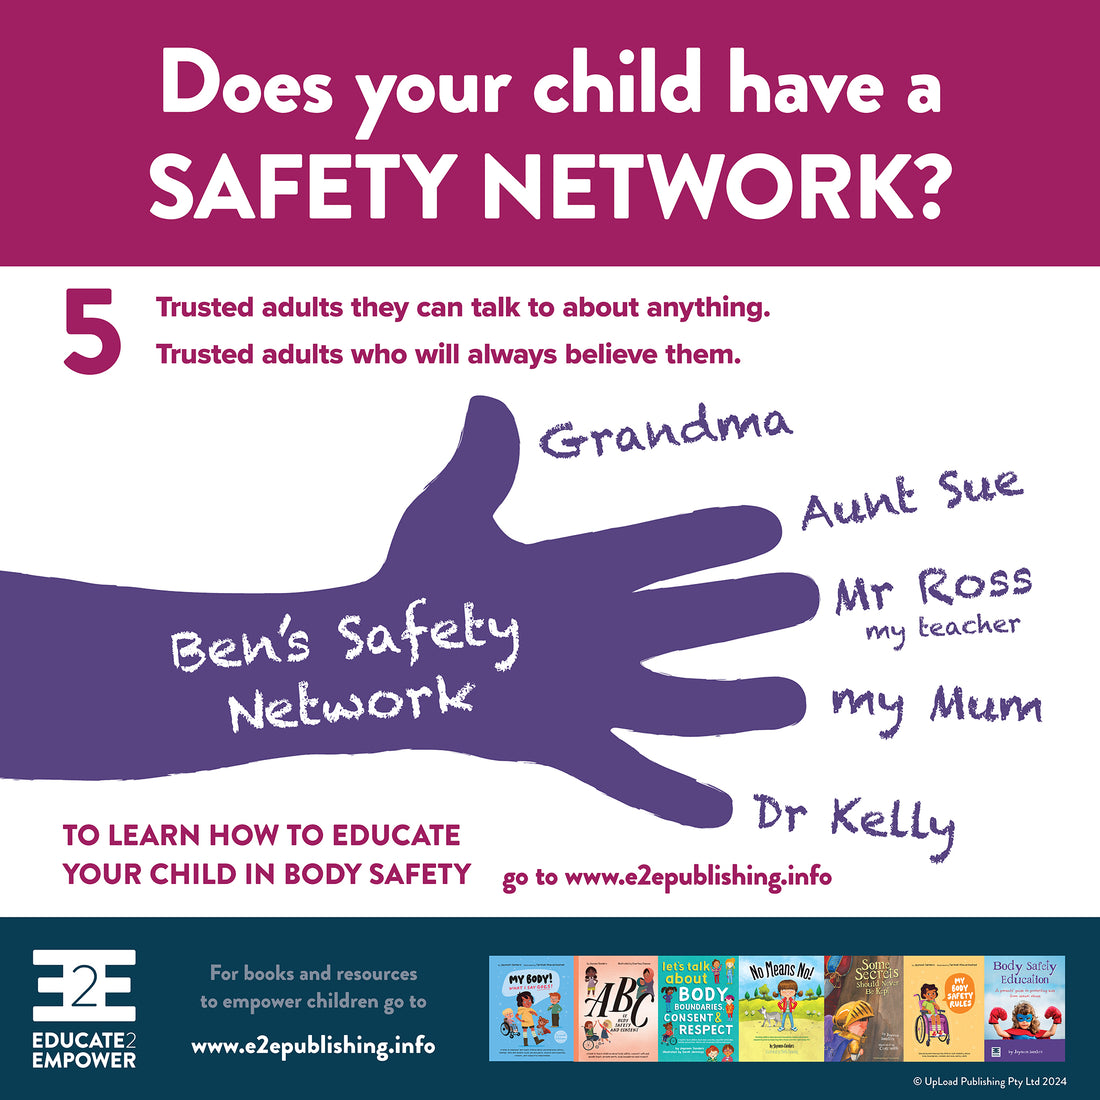 Does your child have a SAFETY NETWORK?